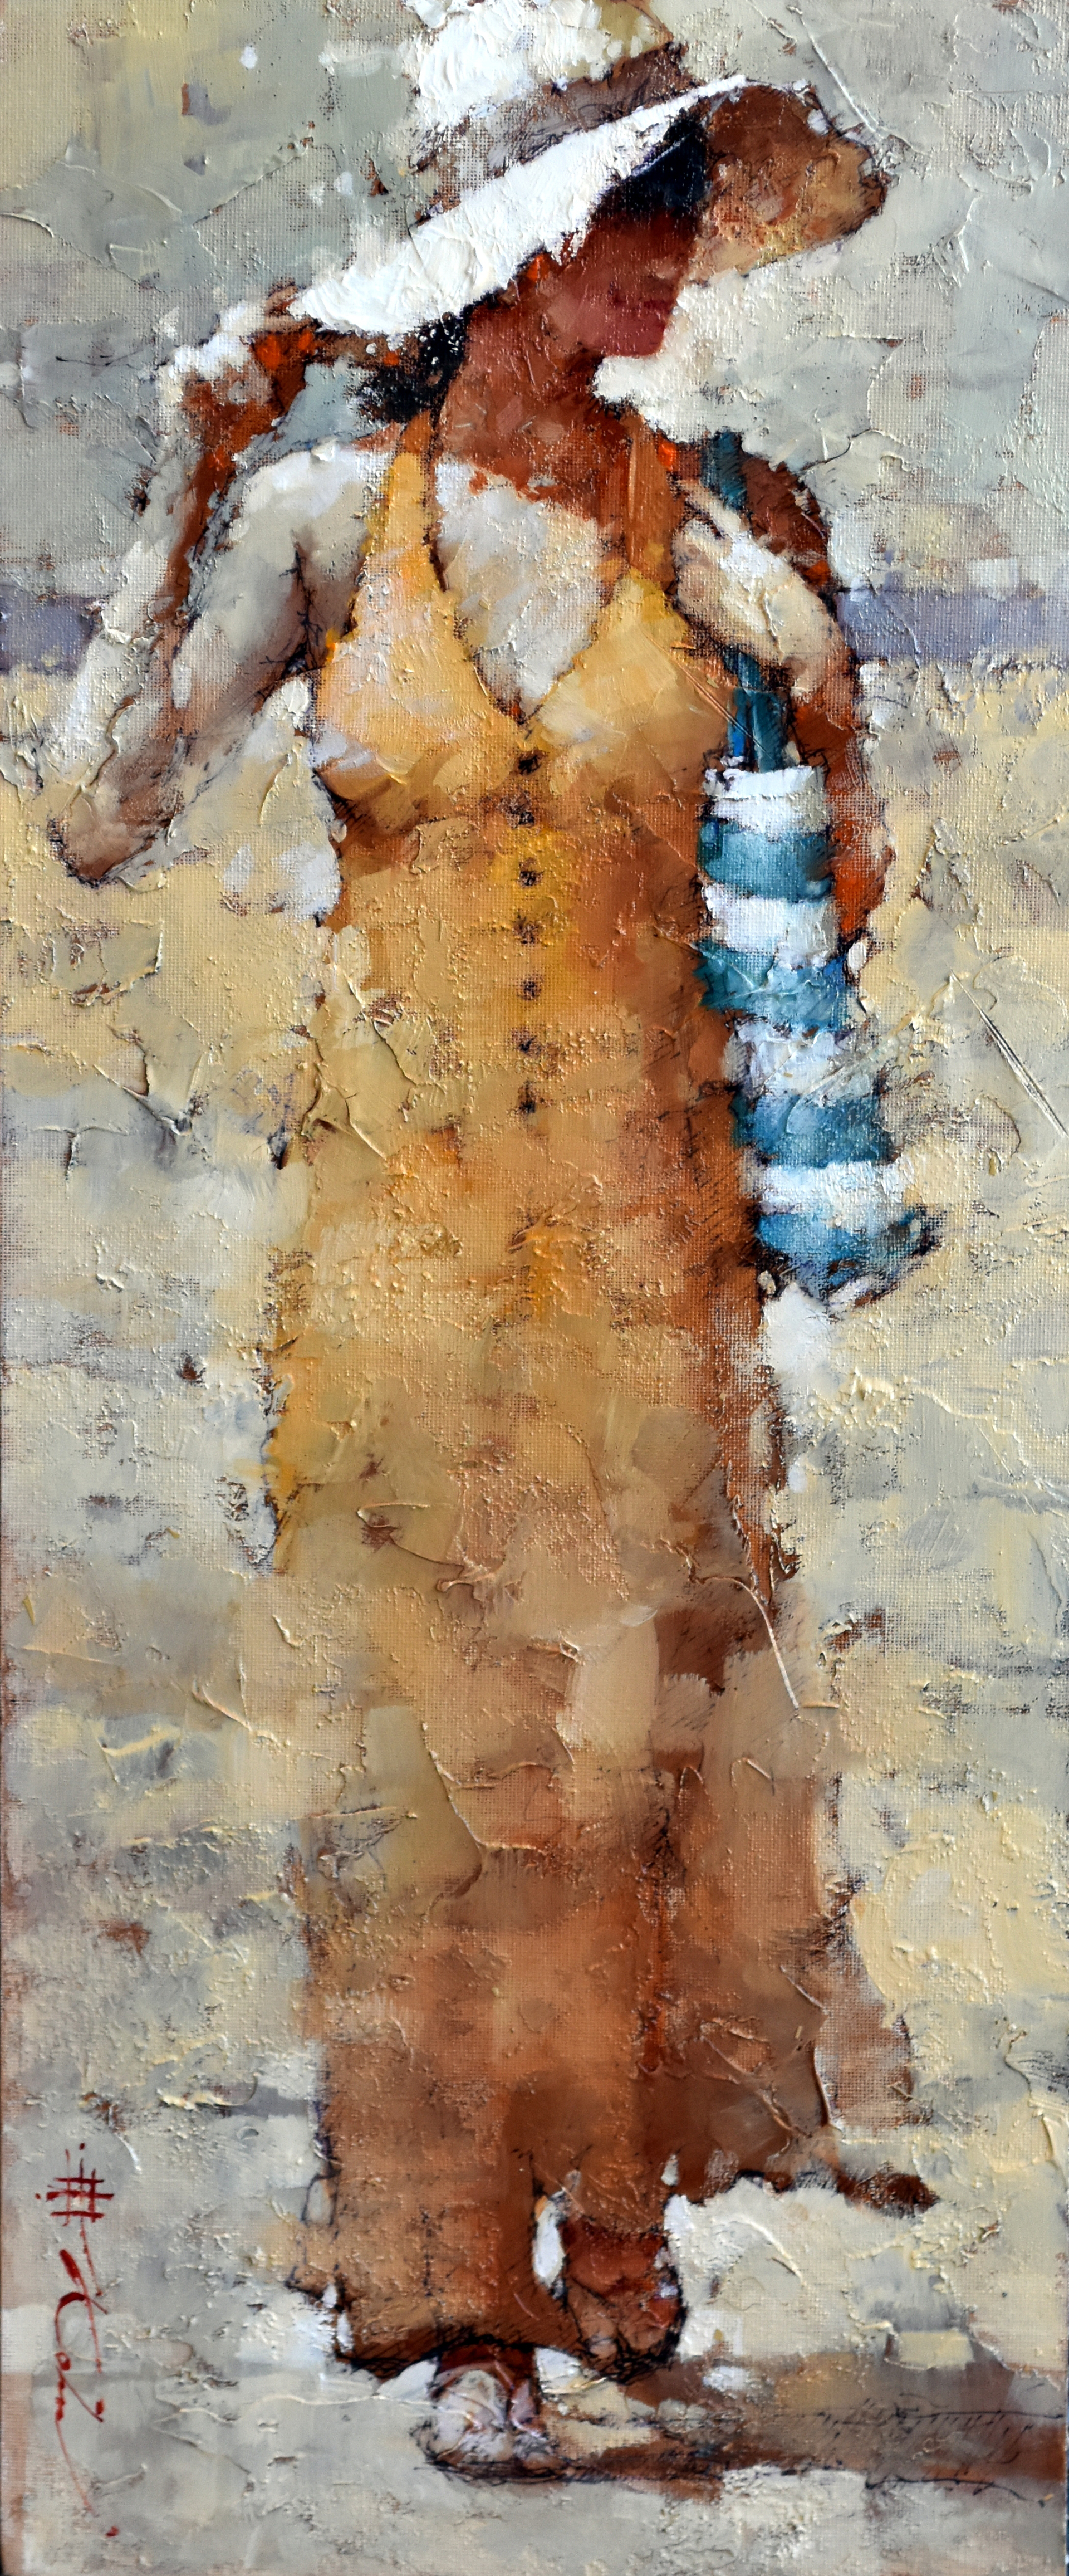 "On the Theme of Yellow" #9 by Andre Kohn